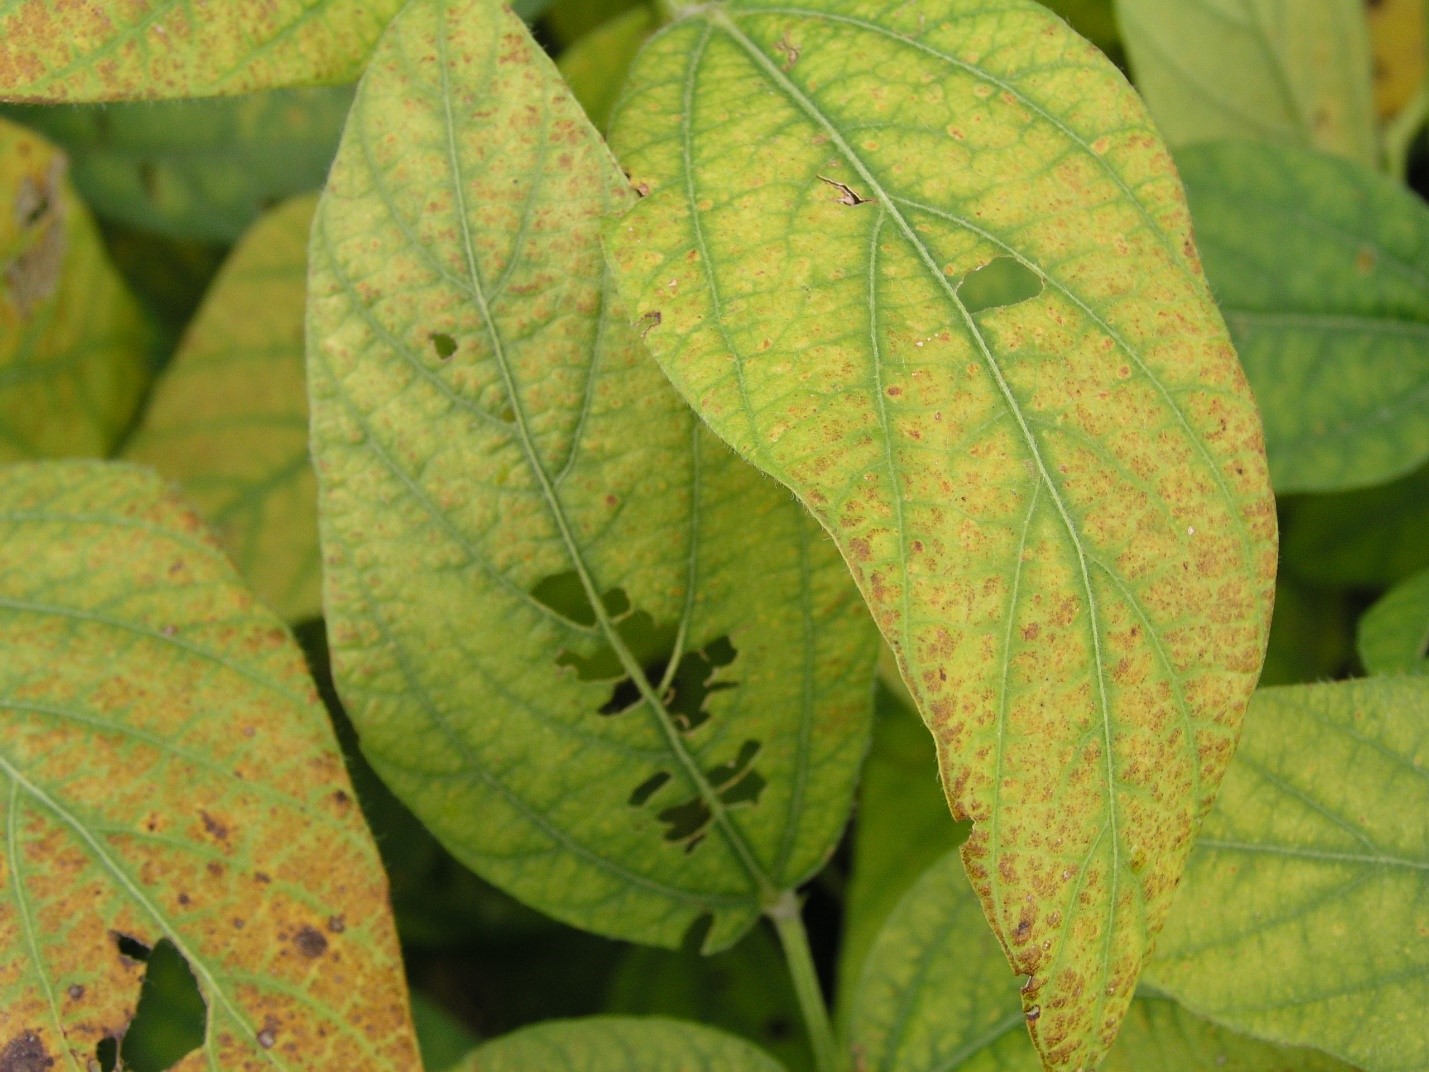 Agronomic image of soybean rust